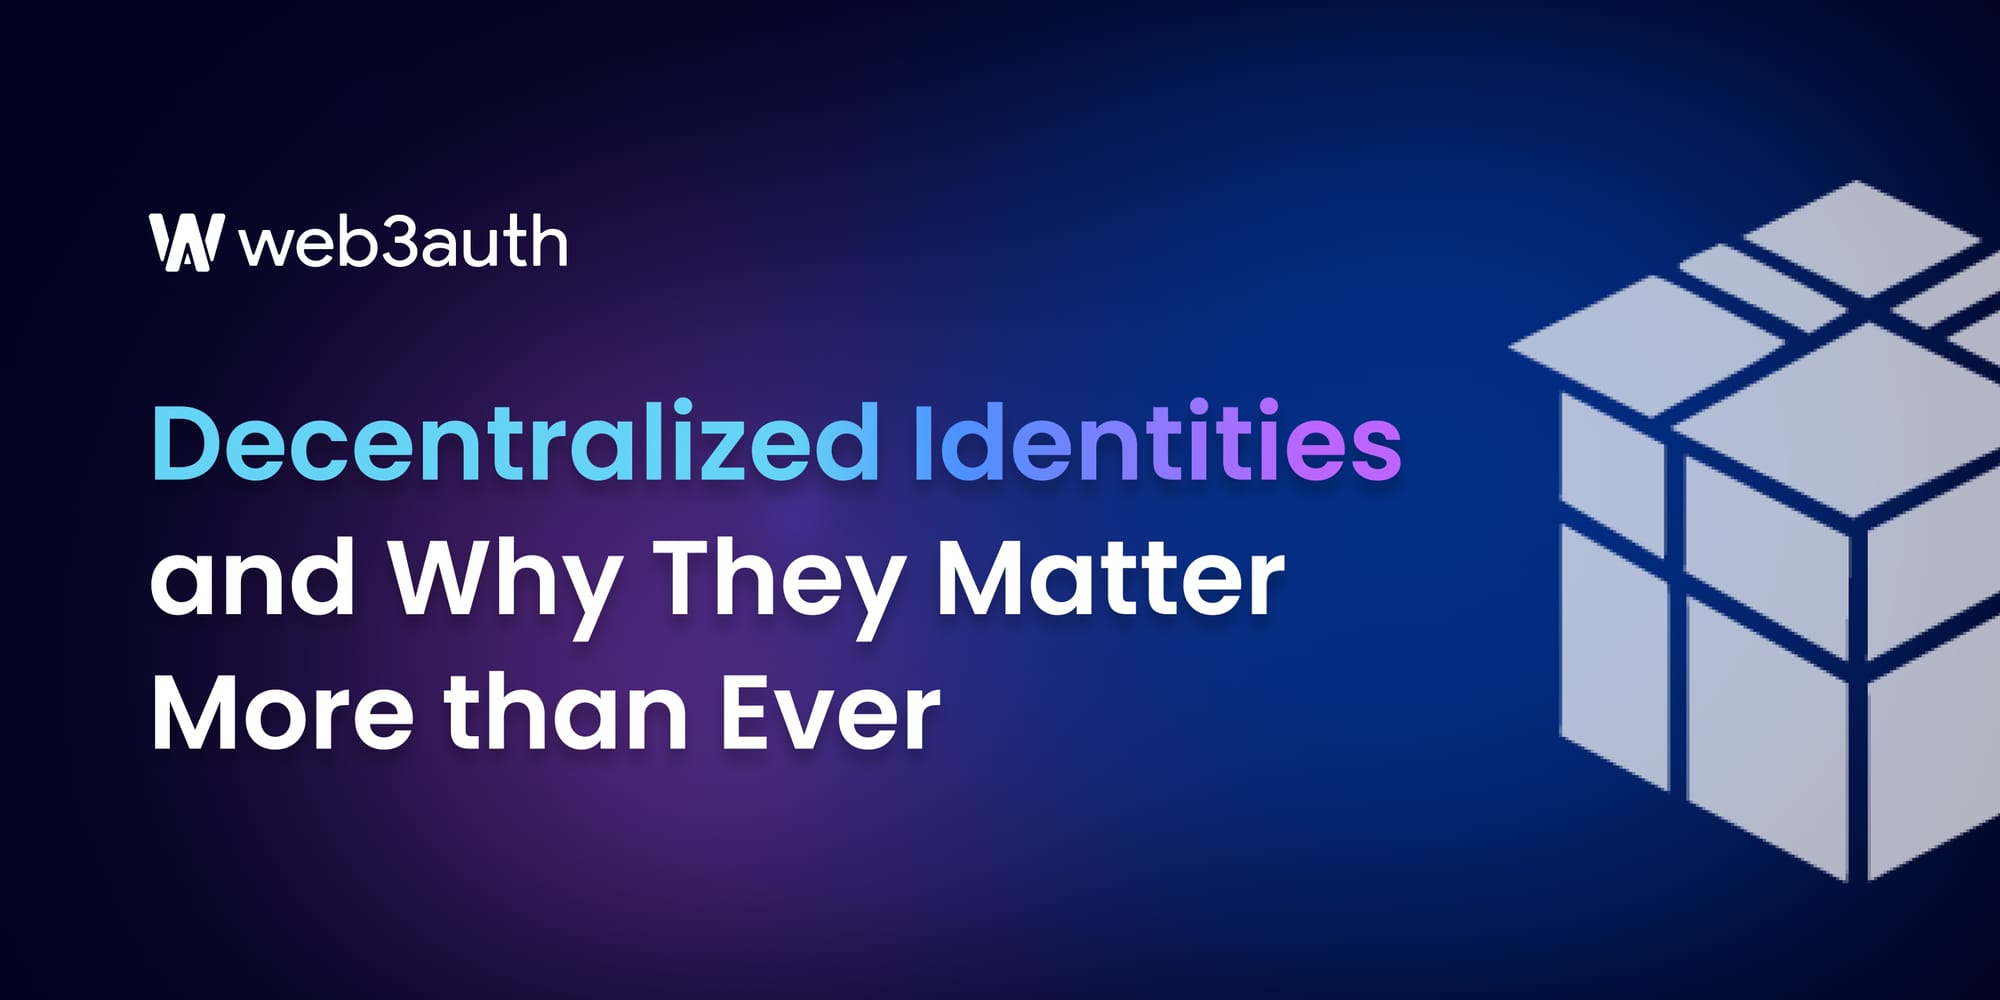 Decentralized Identities and Why They Matter More than Ever